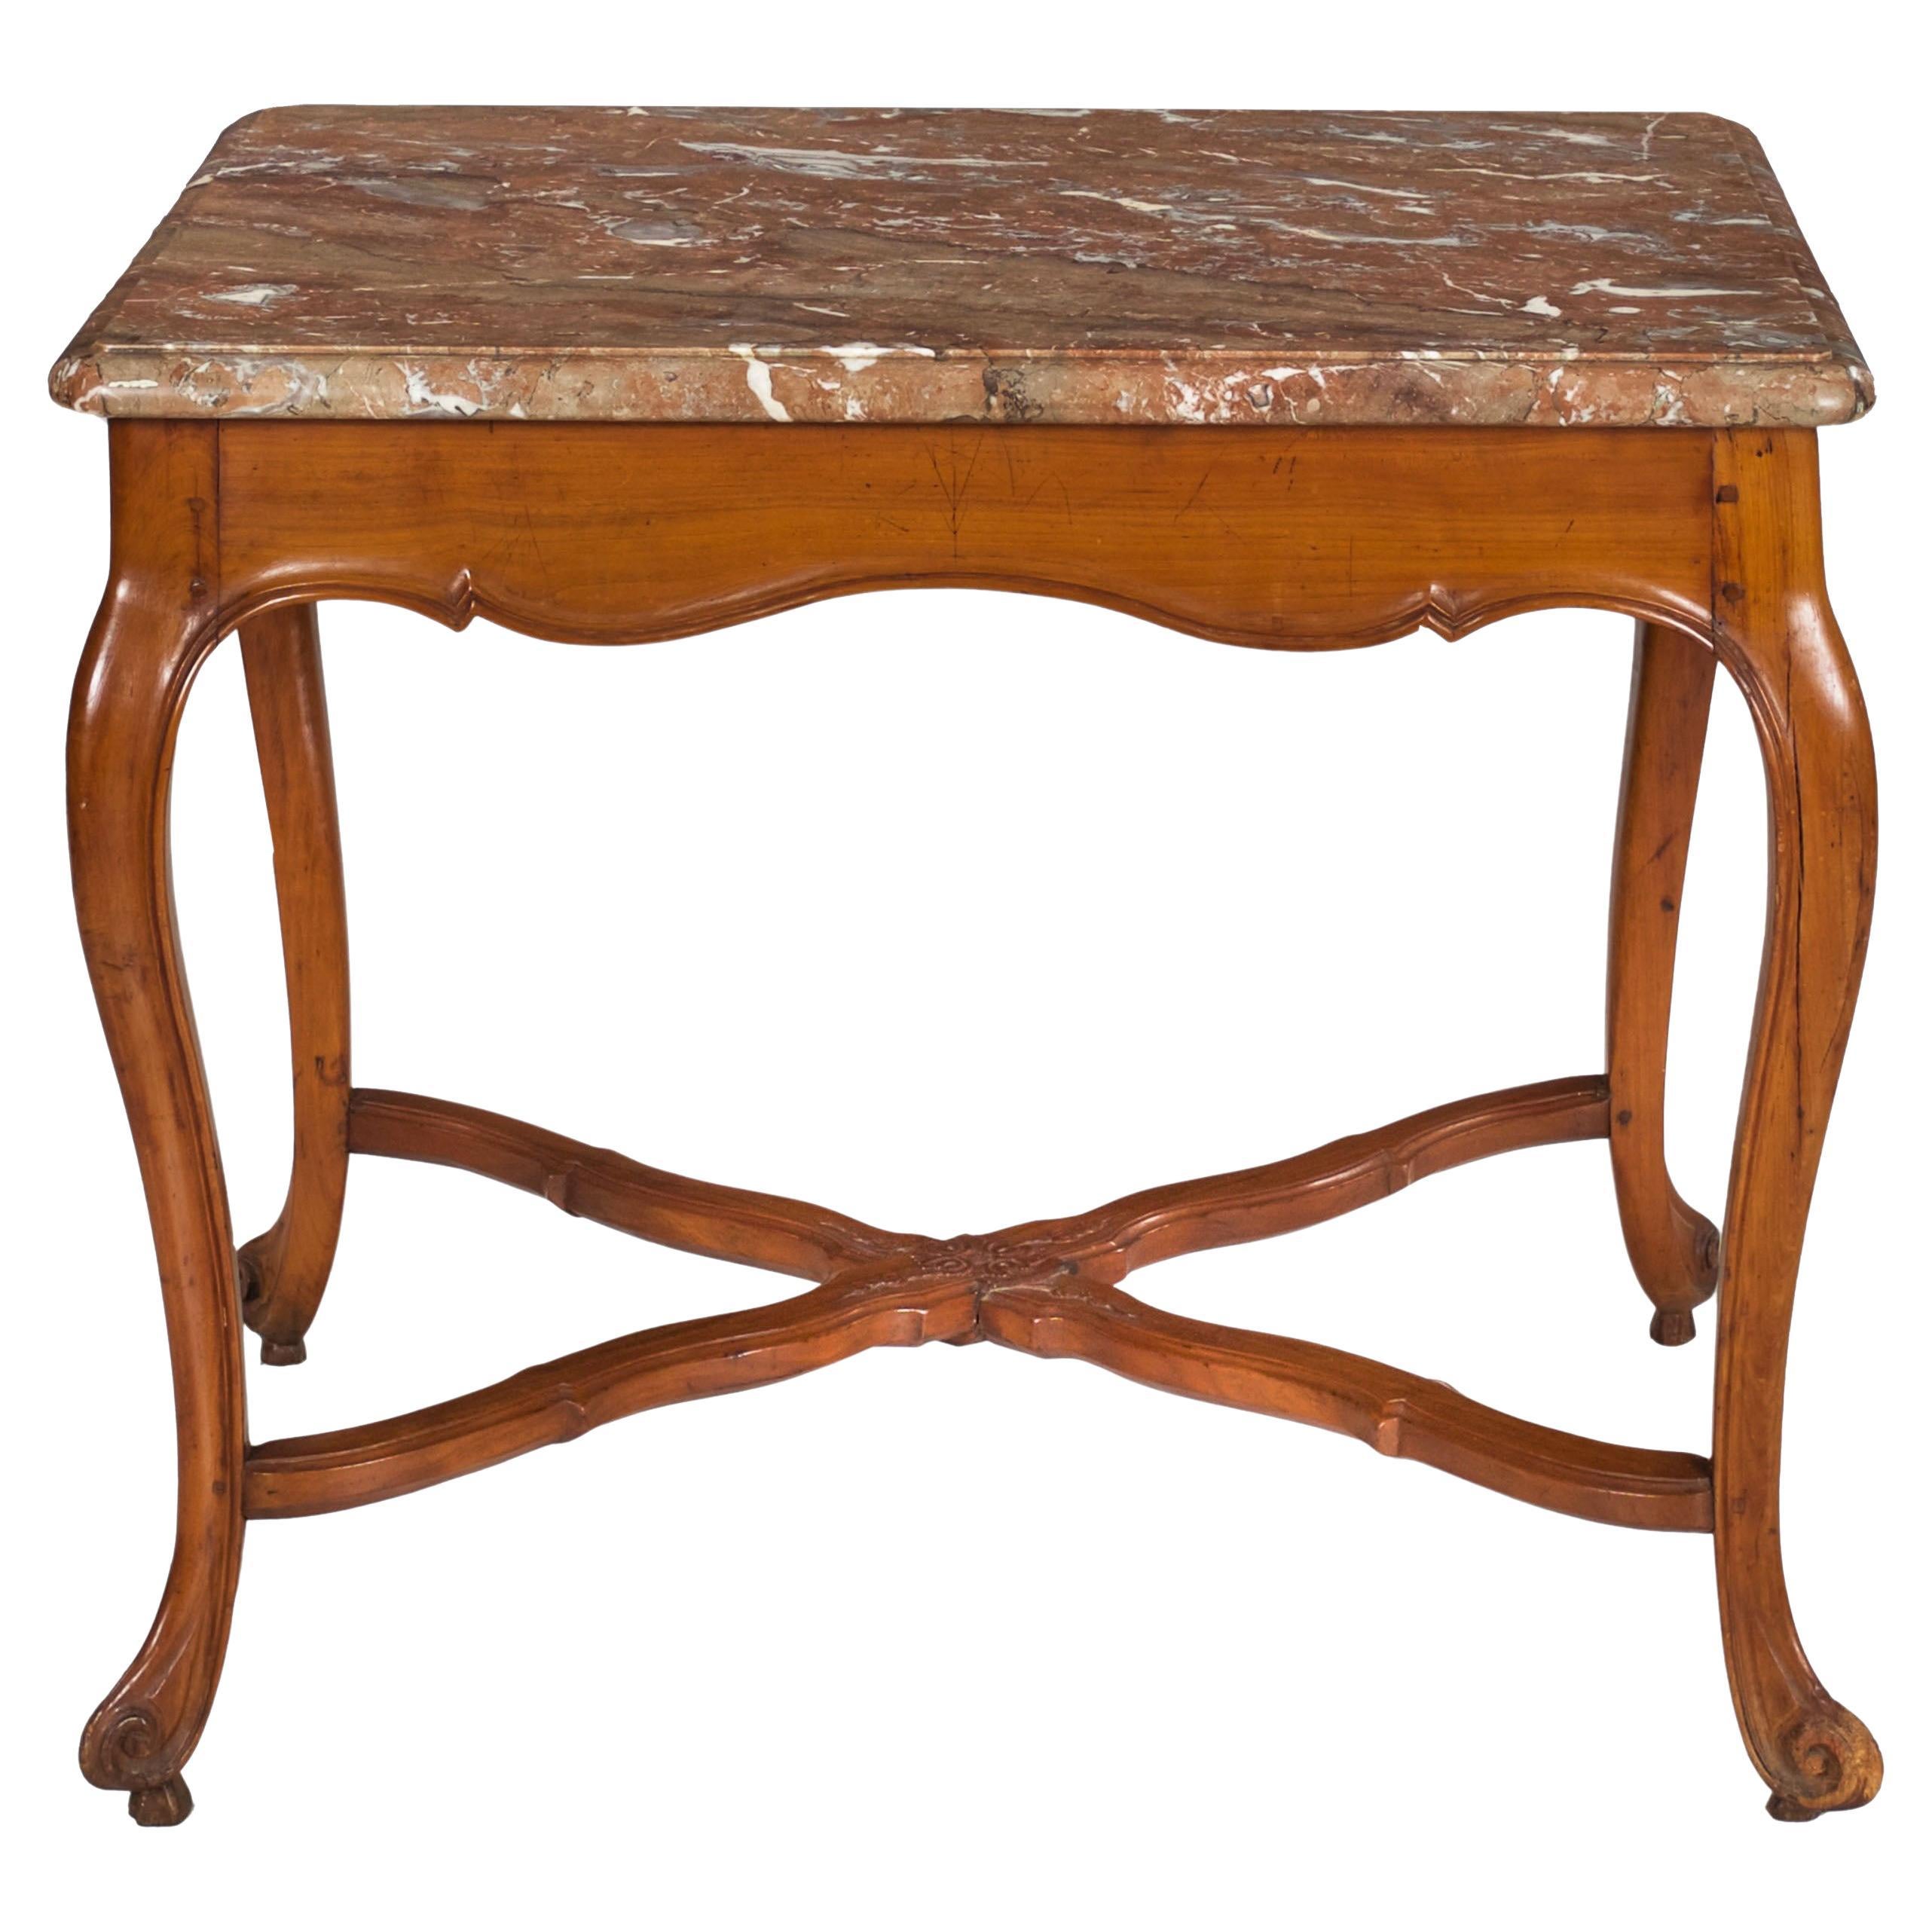 French Louis XV Period Provincial Cherry Center Table with Marble Top, 18th C